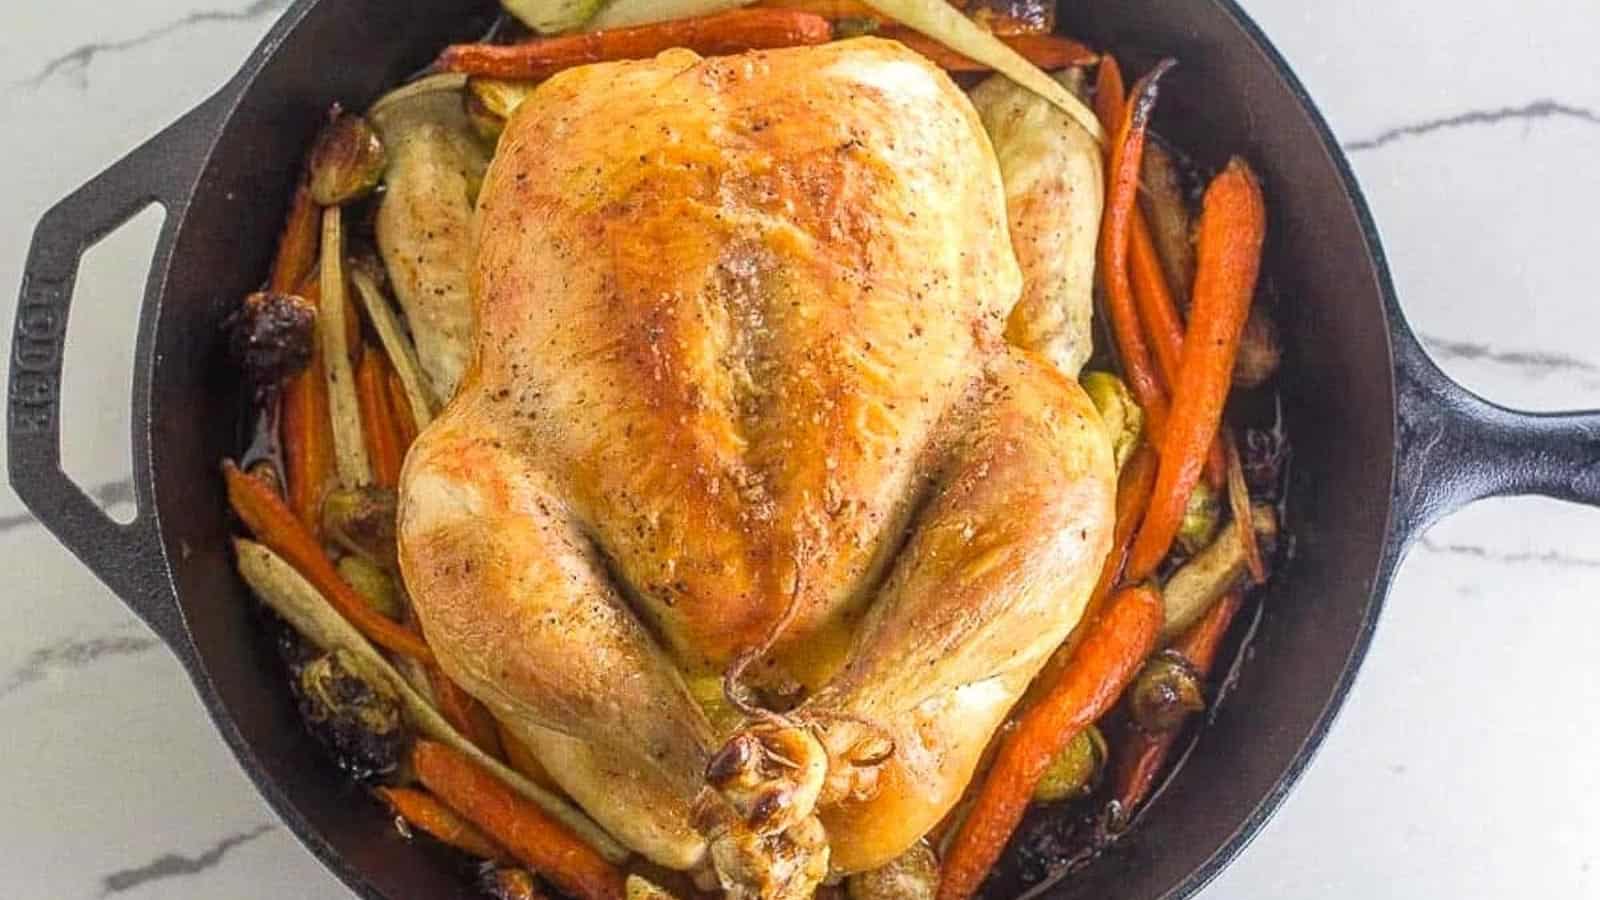 Low-FODMAP-whole-roast-chicken-and-vegetables-in-cast-iron-pan-on-white-quartz.